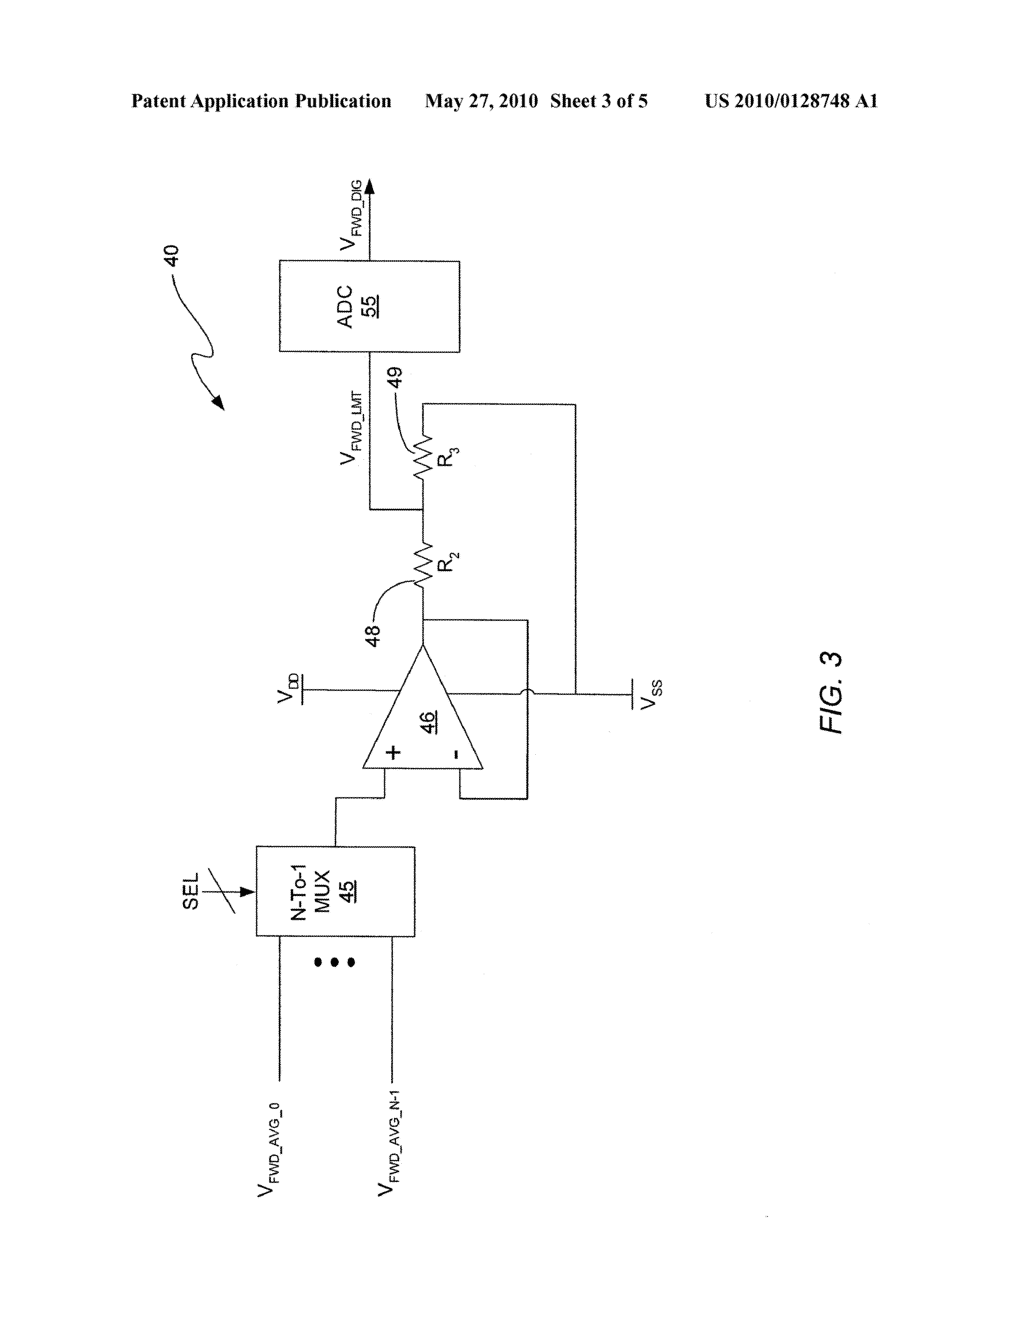 MONITORING METHOD AND DEVICE FOR MONITORING A FORWARD VOLTAGE OF A LASER DIODE IN A LASER DIODE DRIVER INTEGRATED CIRCUIT (IC) - diagram, schematic, and image 04